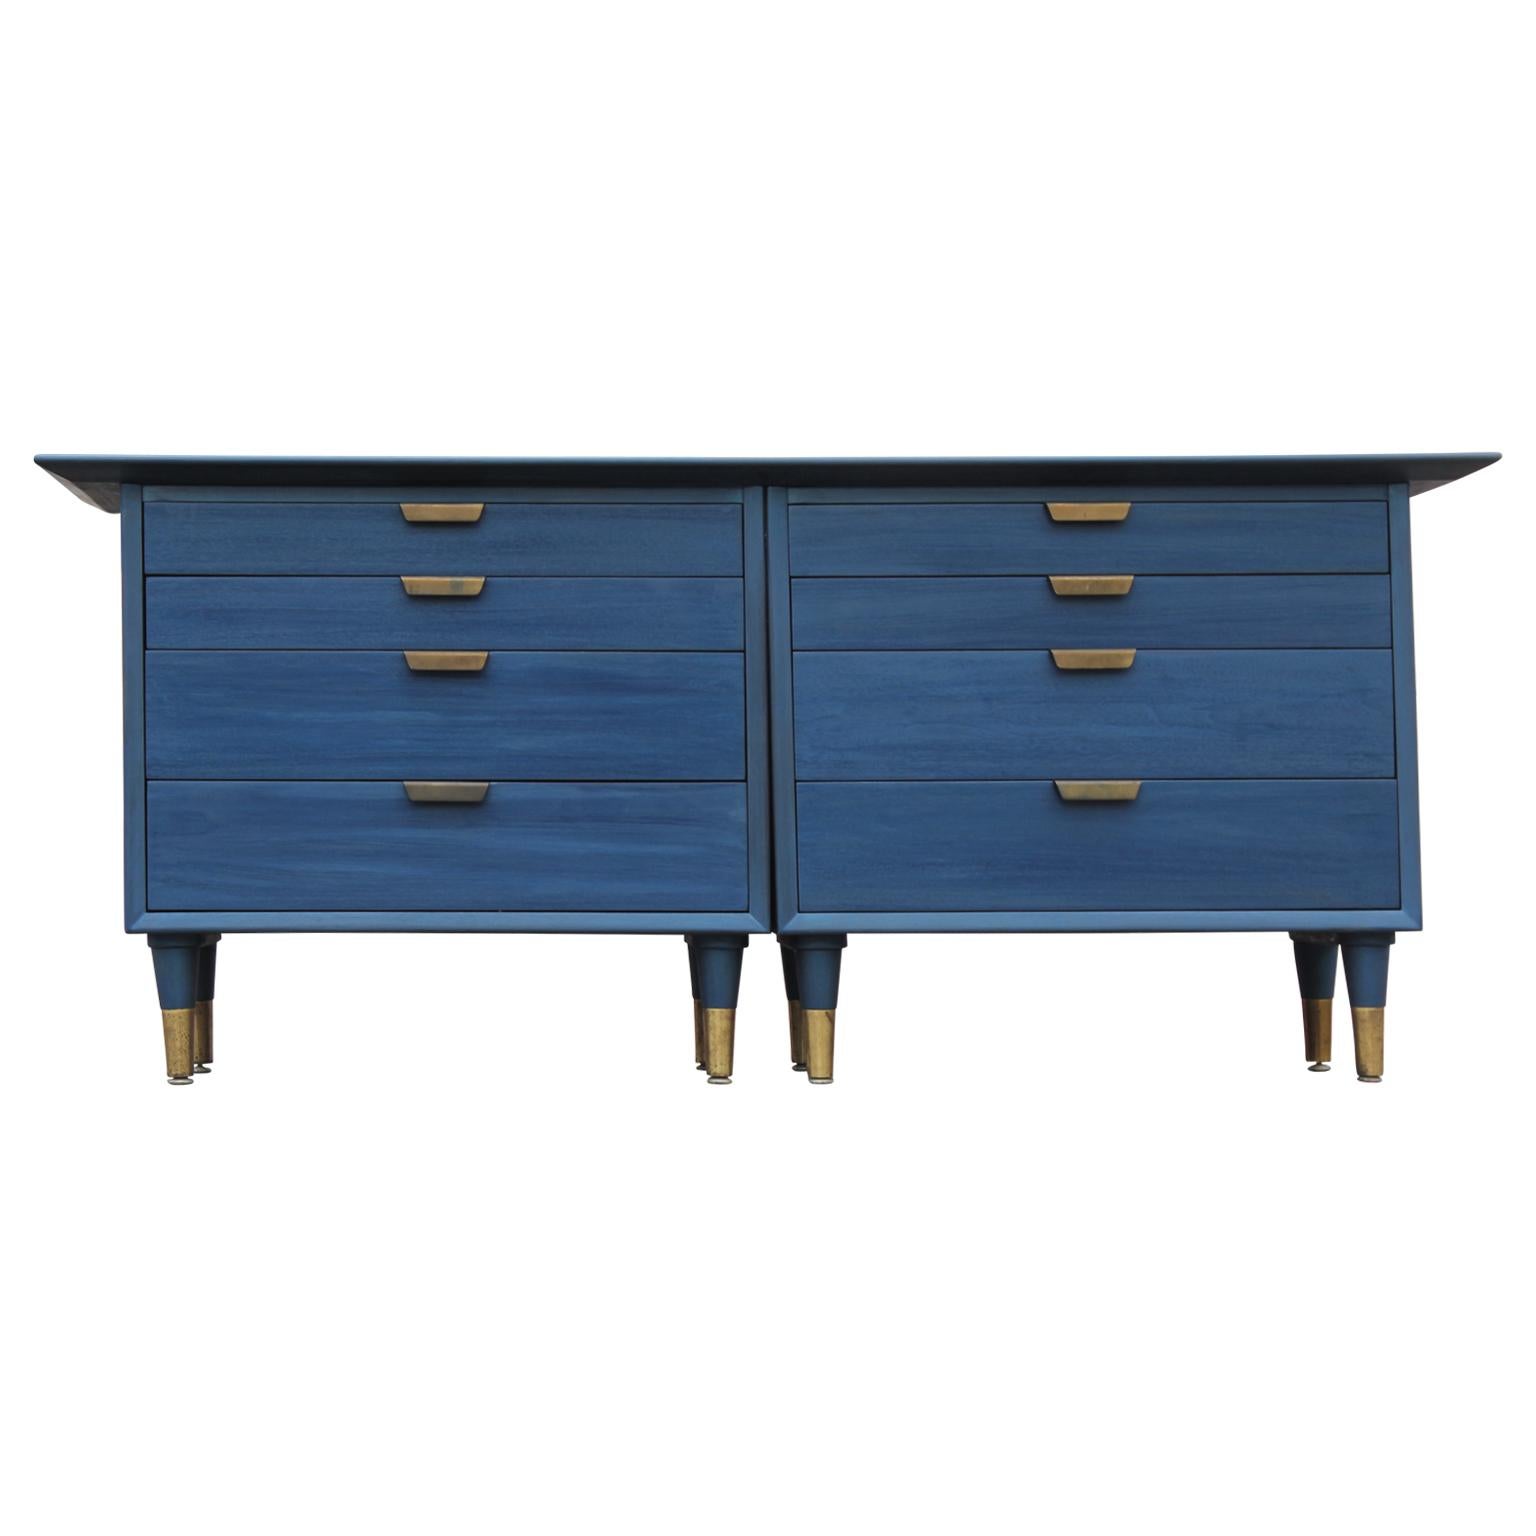 Stunning modern blue chest or dresser. It has been restored with a blue aniline finish. It has 8 drawers with flared brass handles. Underneath there are 8 tapered legs with brass caps.